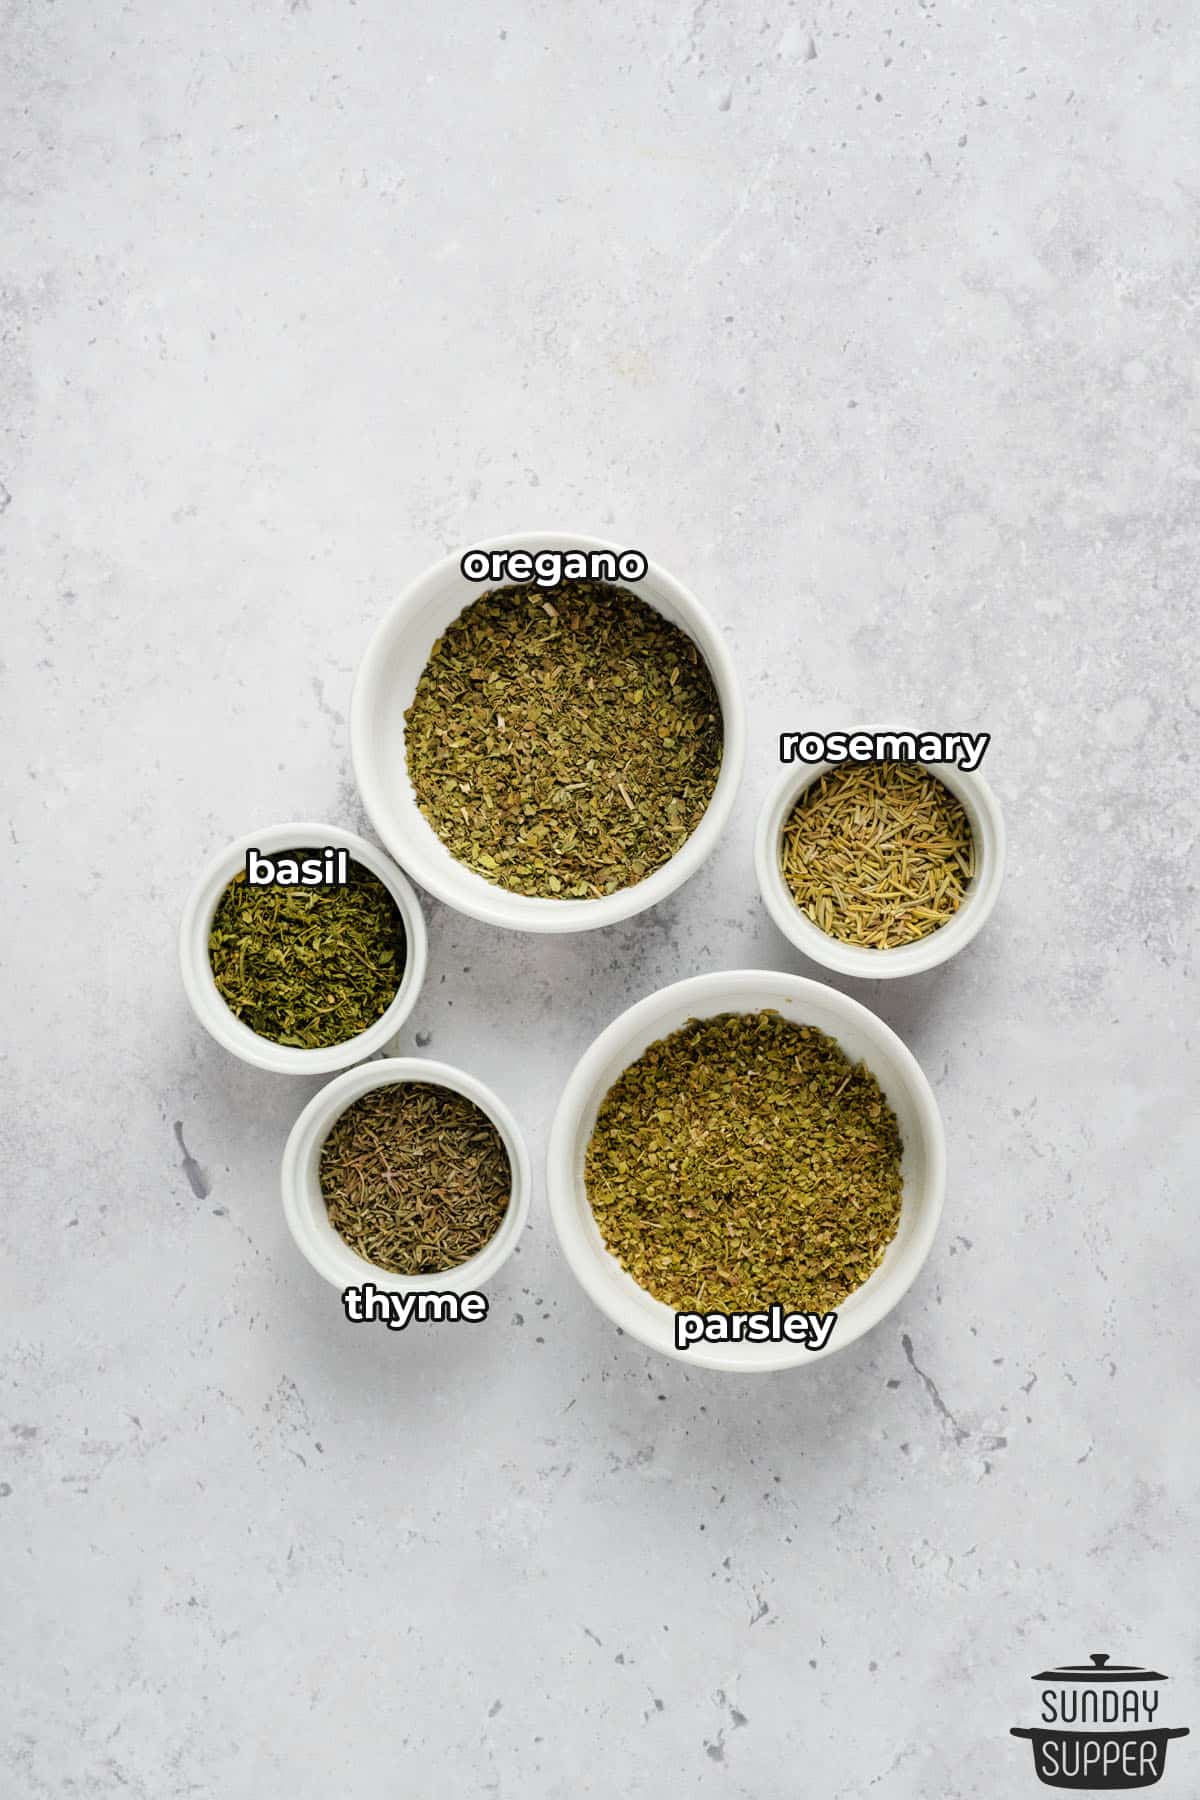 all the ingredients for homemade italian seasoning